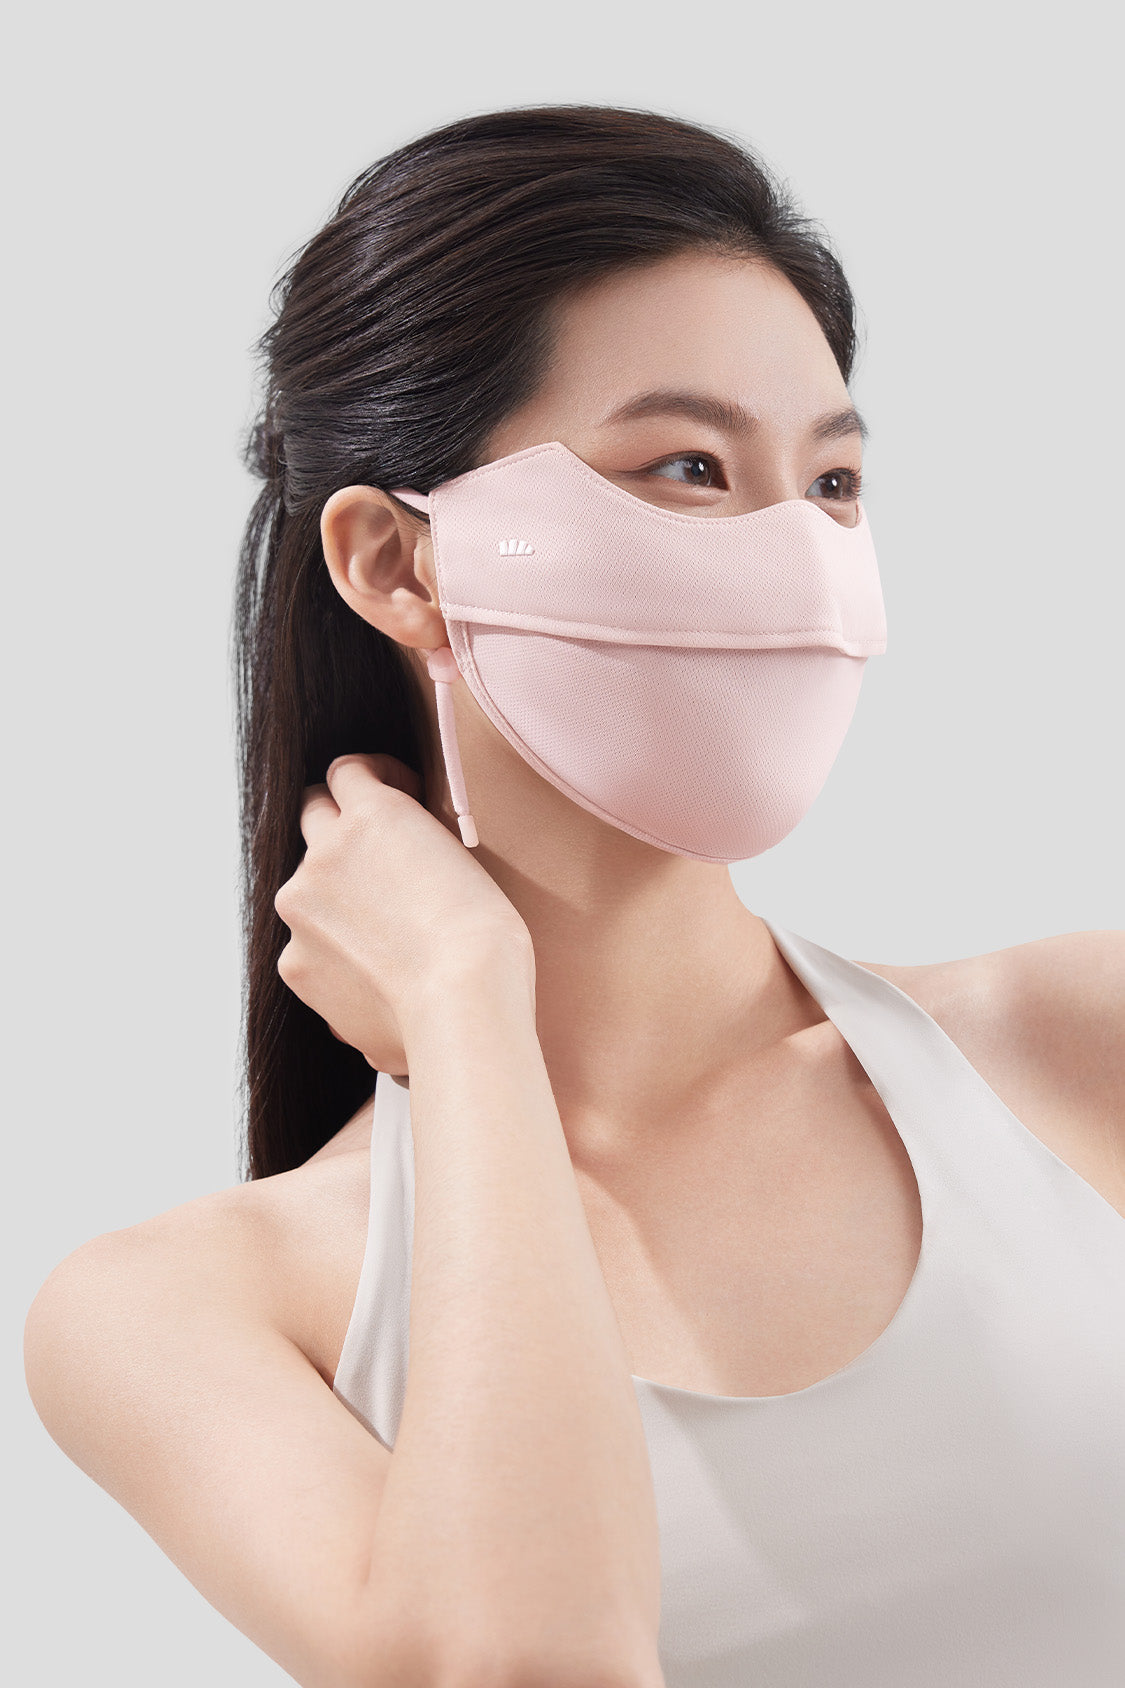 Airyface - Women's Sun Protection Face Mask UPF50+